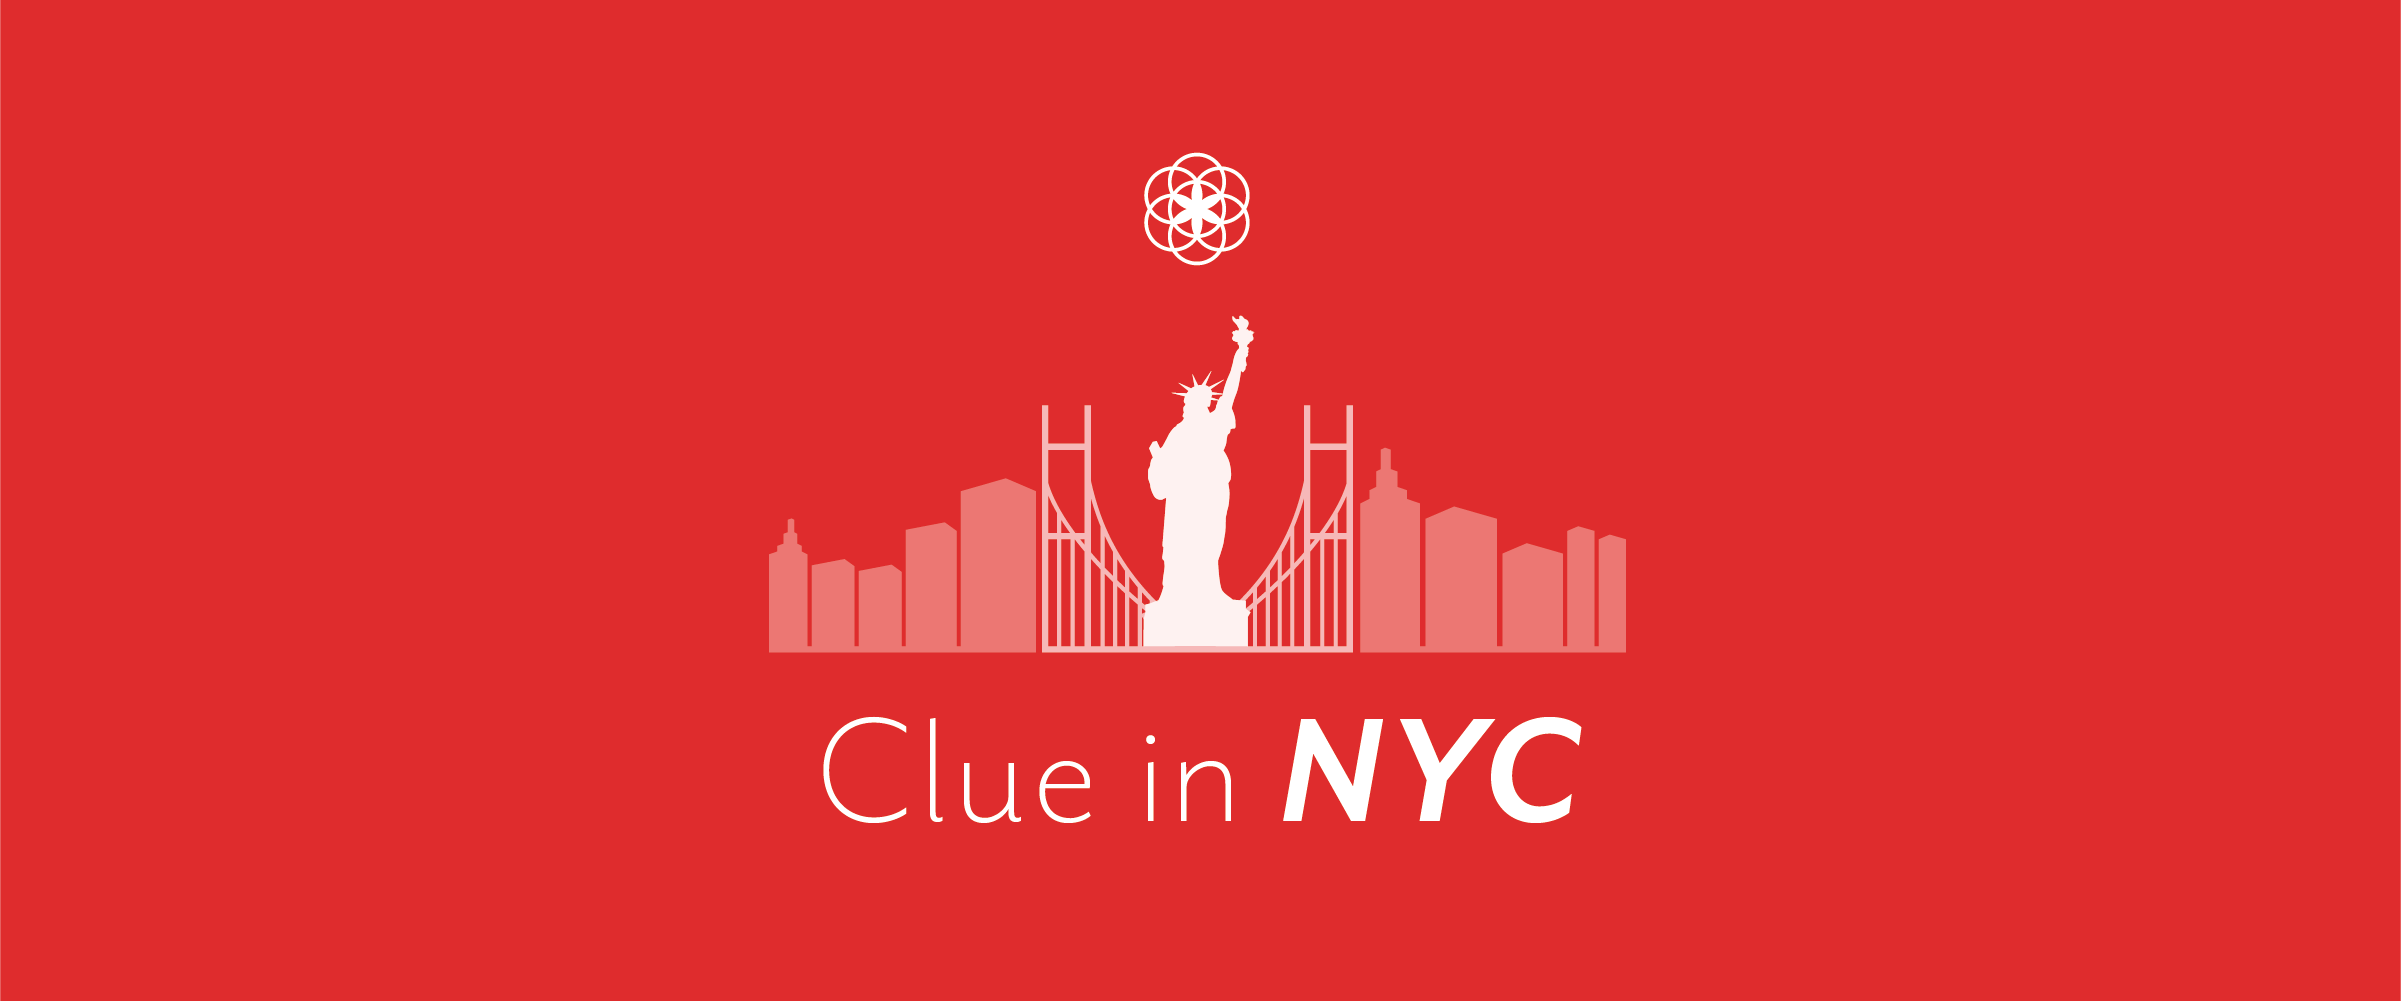 New York City skyline with statue of liberty and Clue logo